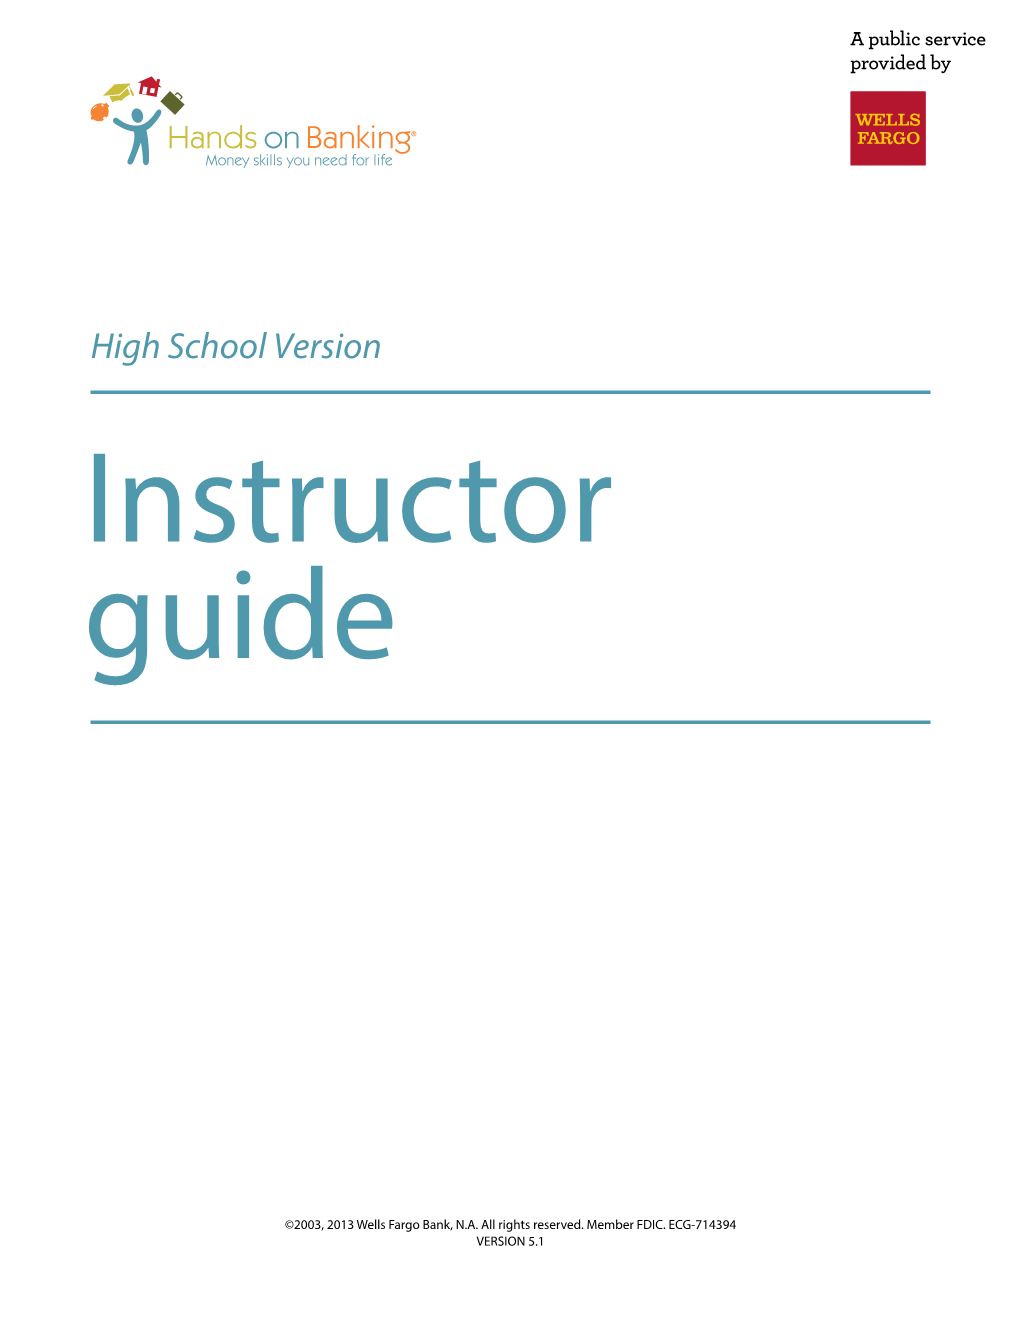 High School Version Instructor Guide